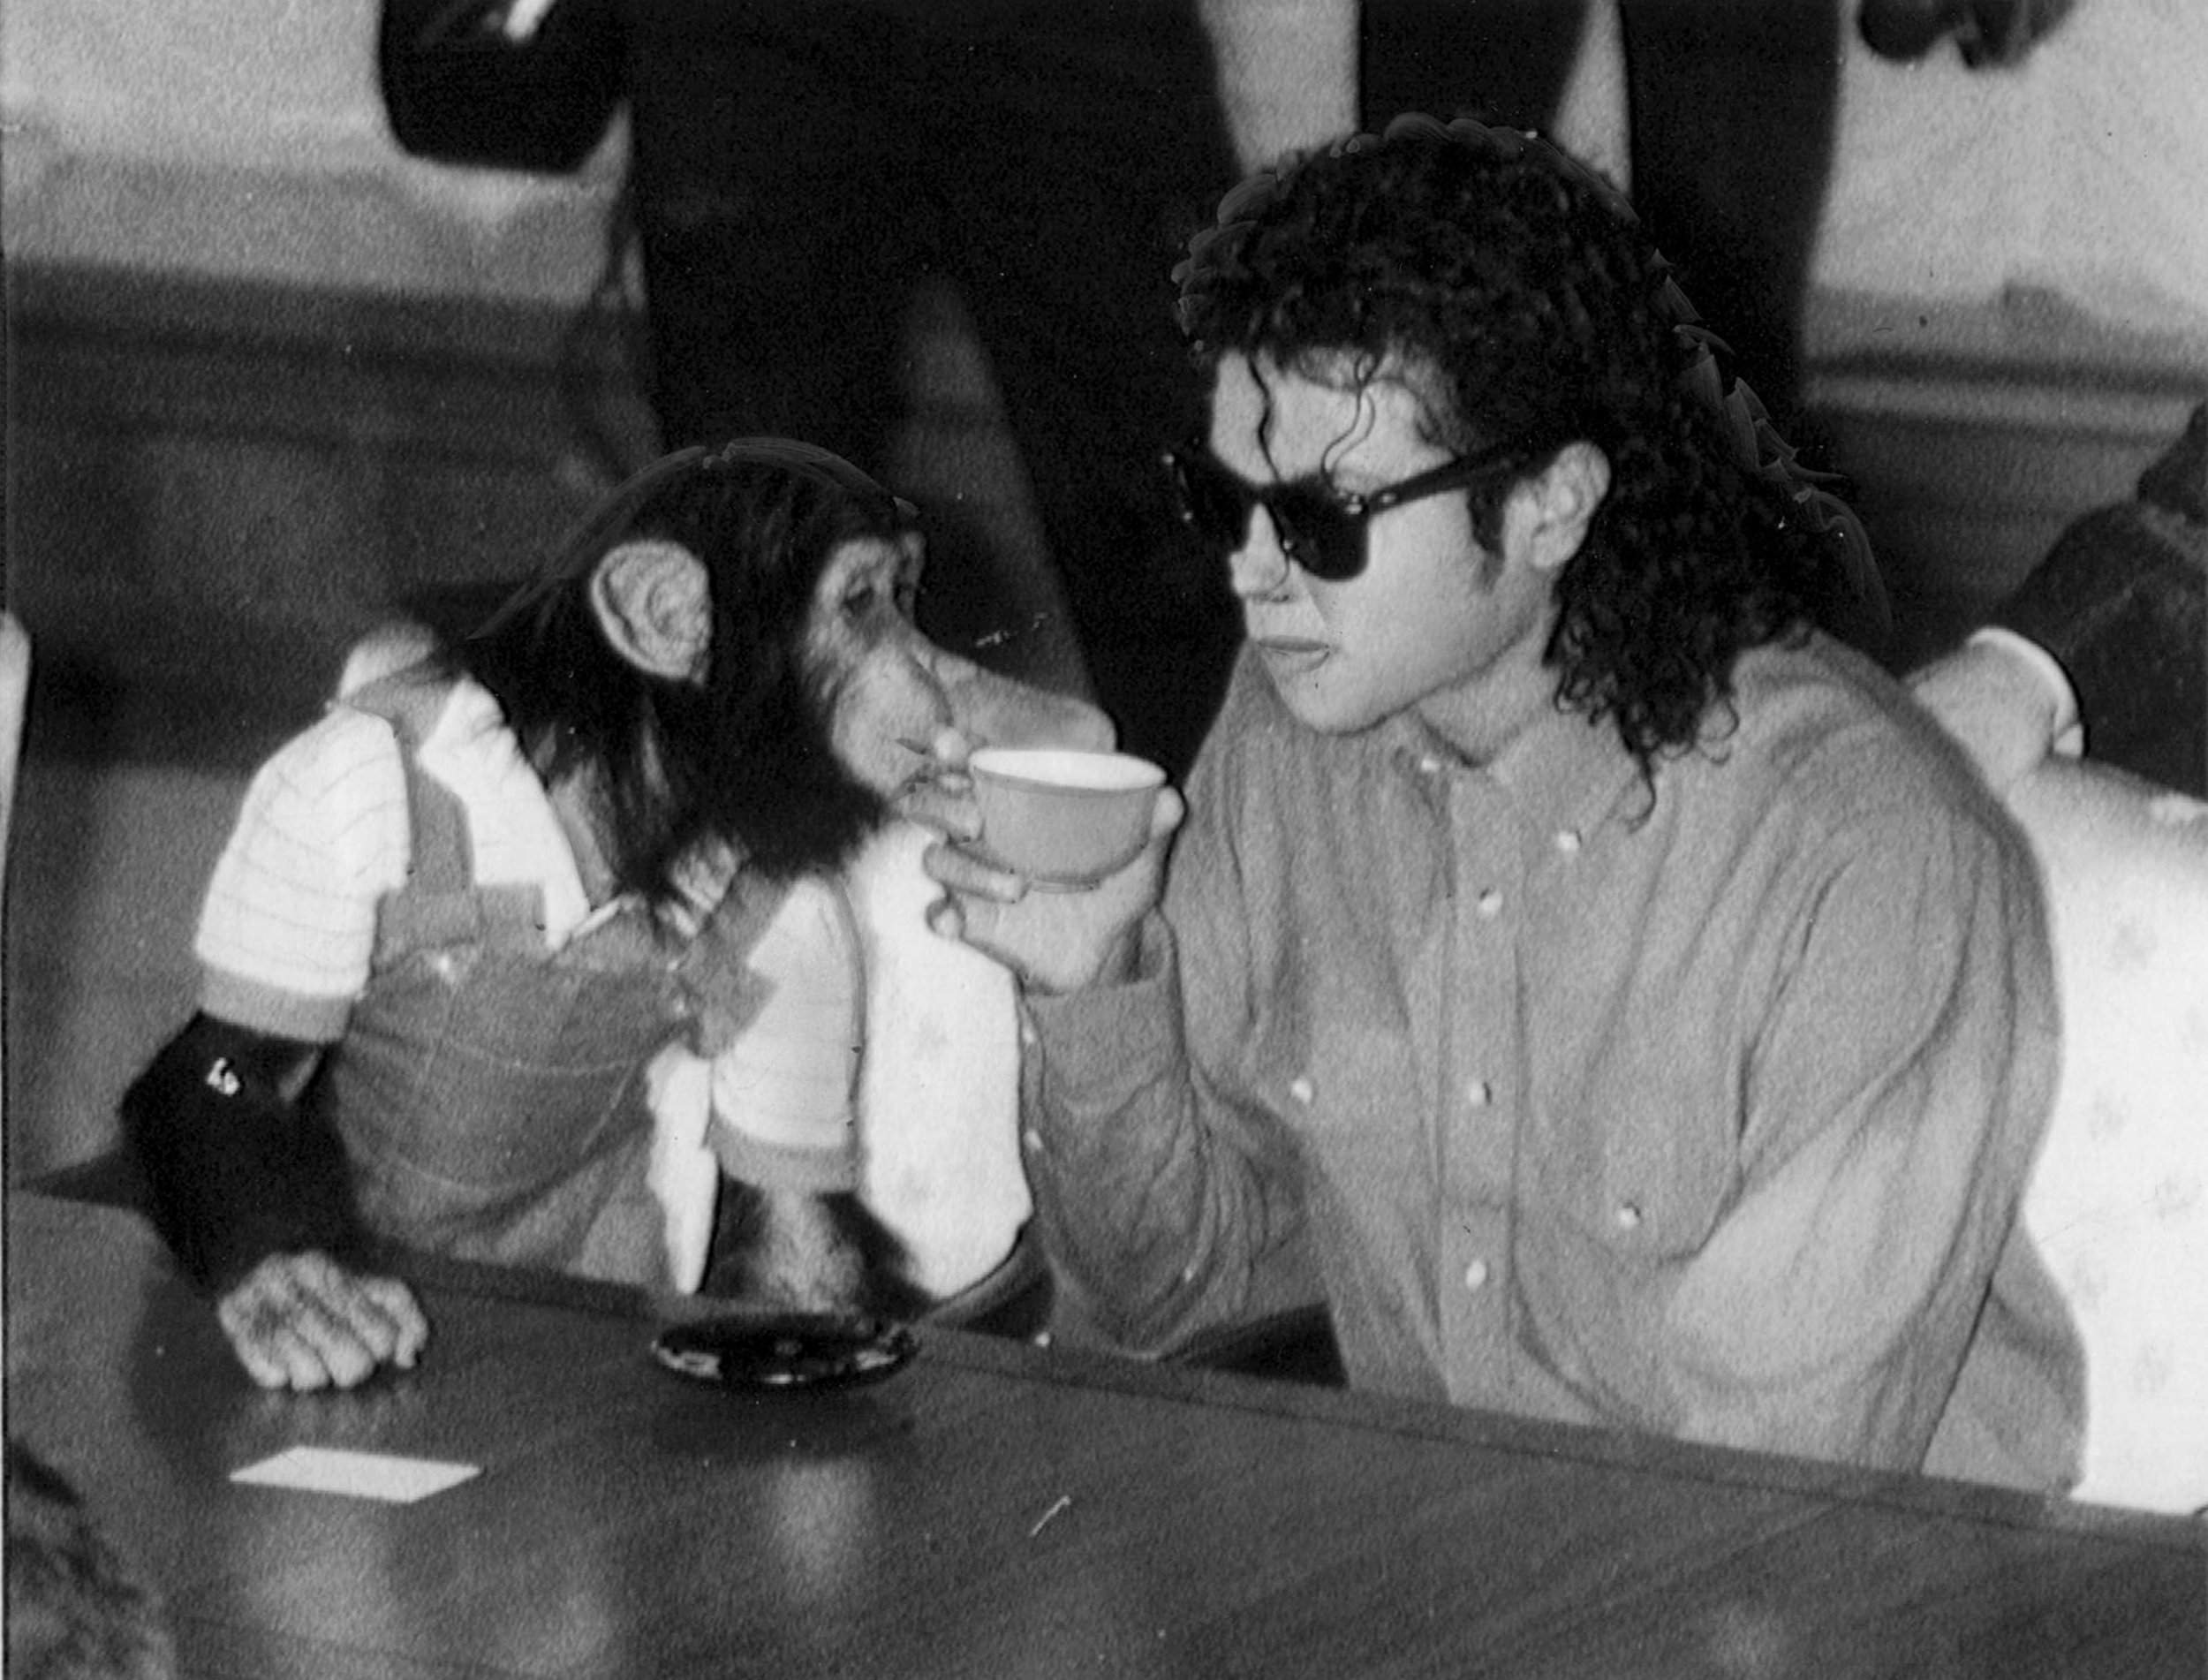 Michael Jackson sitting at a table with his chimpanzee Bubbles 